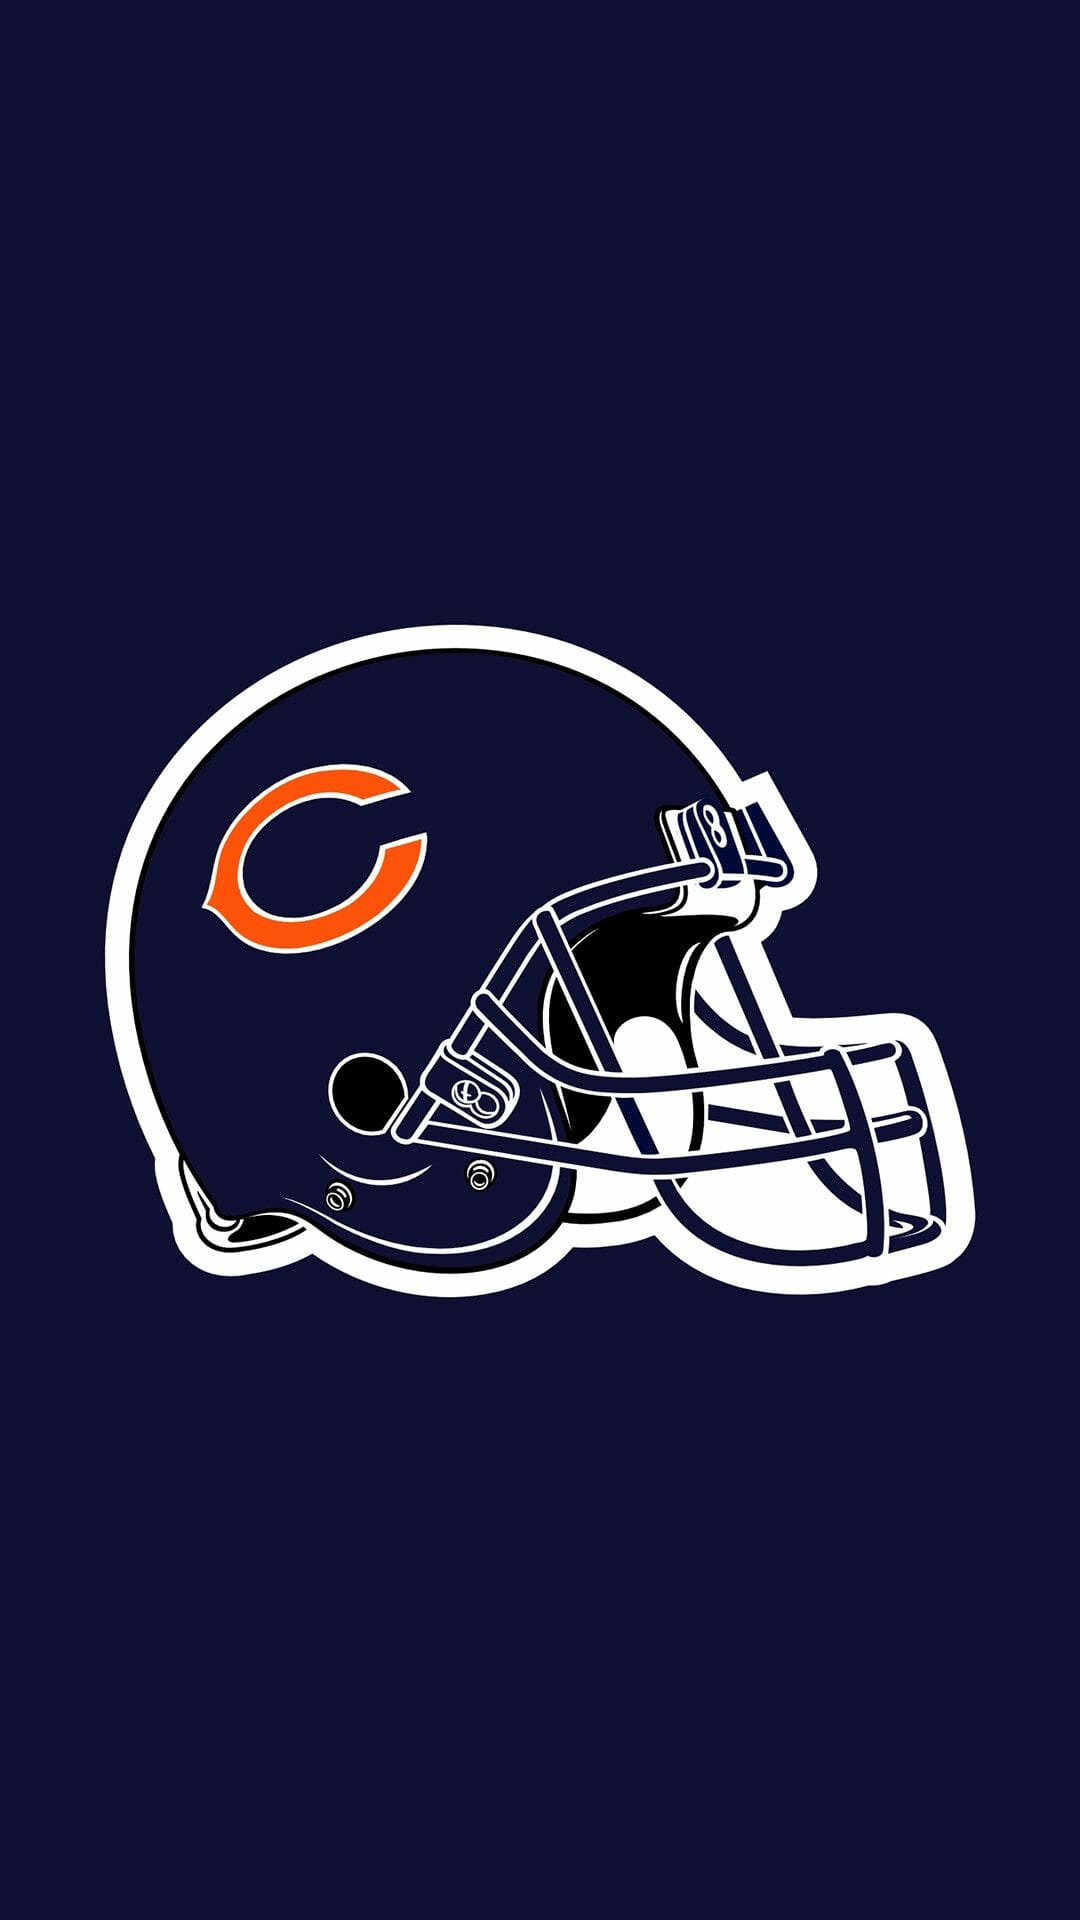 Chicago Bears iPhone, iPhone, Desktop HD Background / Wallpaper (1080p, 4k) HD Wallpaper (Desktop Background / Android / iPhone) (1080p, 4k) (1080x1920) (2022)